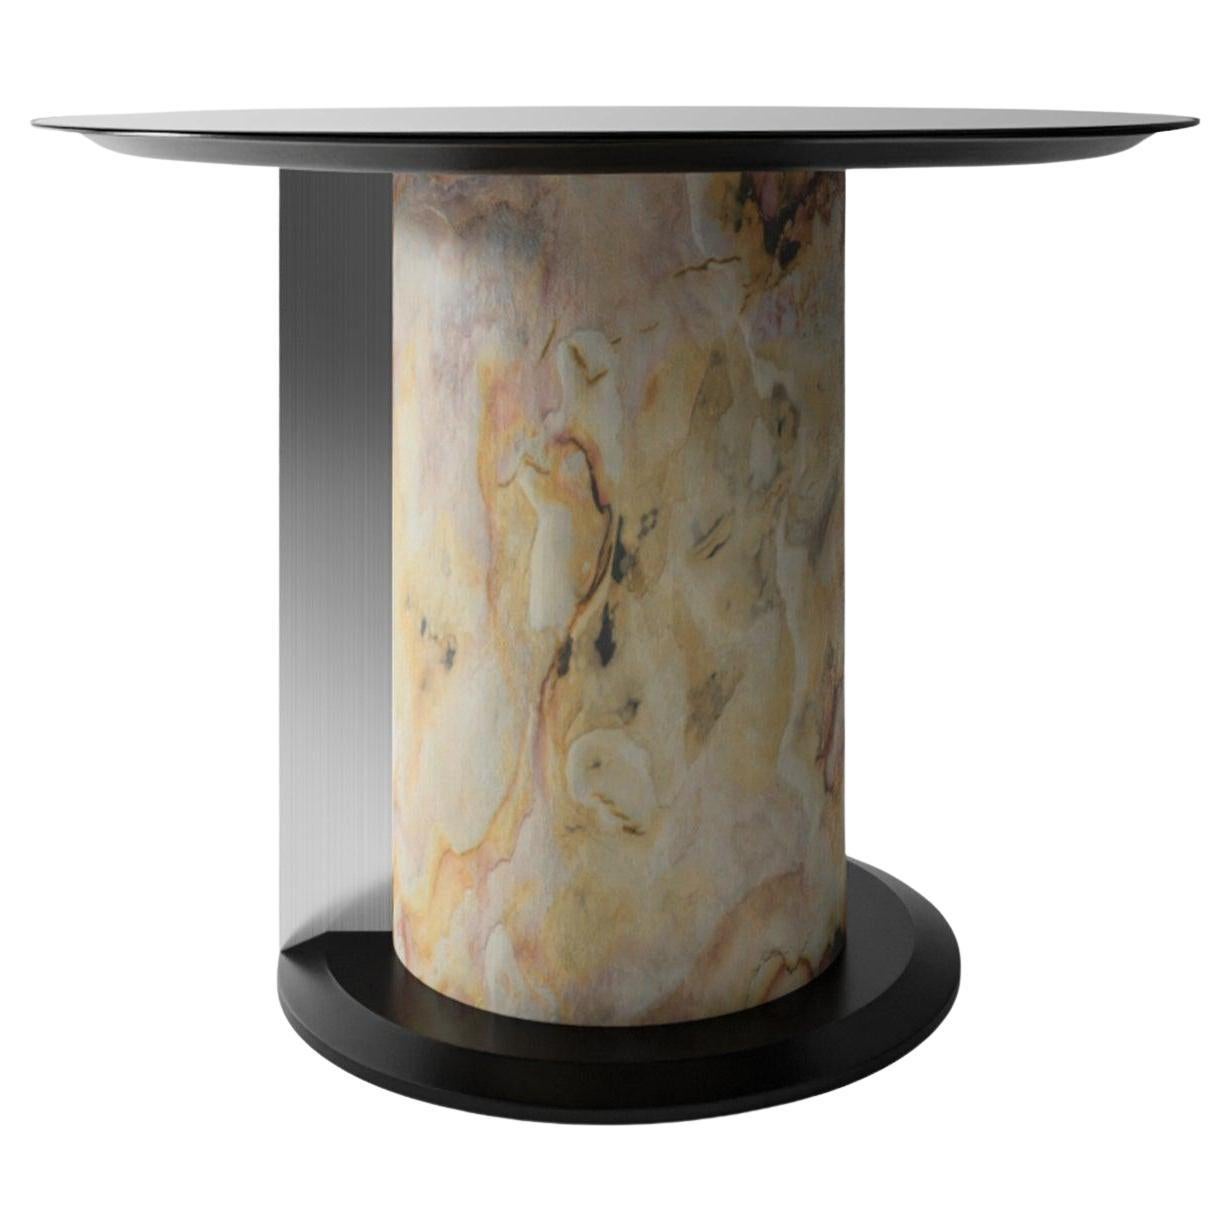 Tim Round Black Glass & Refined Marble Dining Table